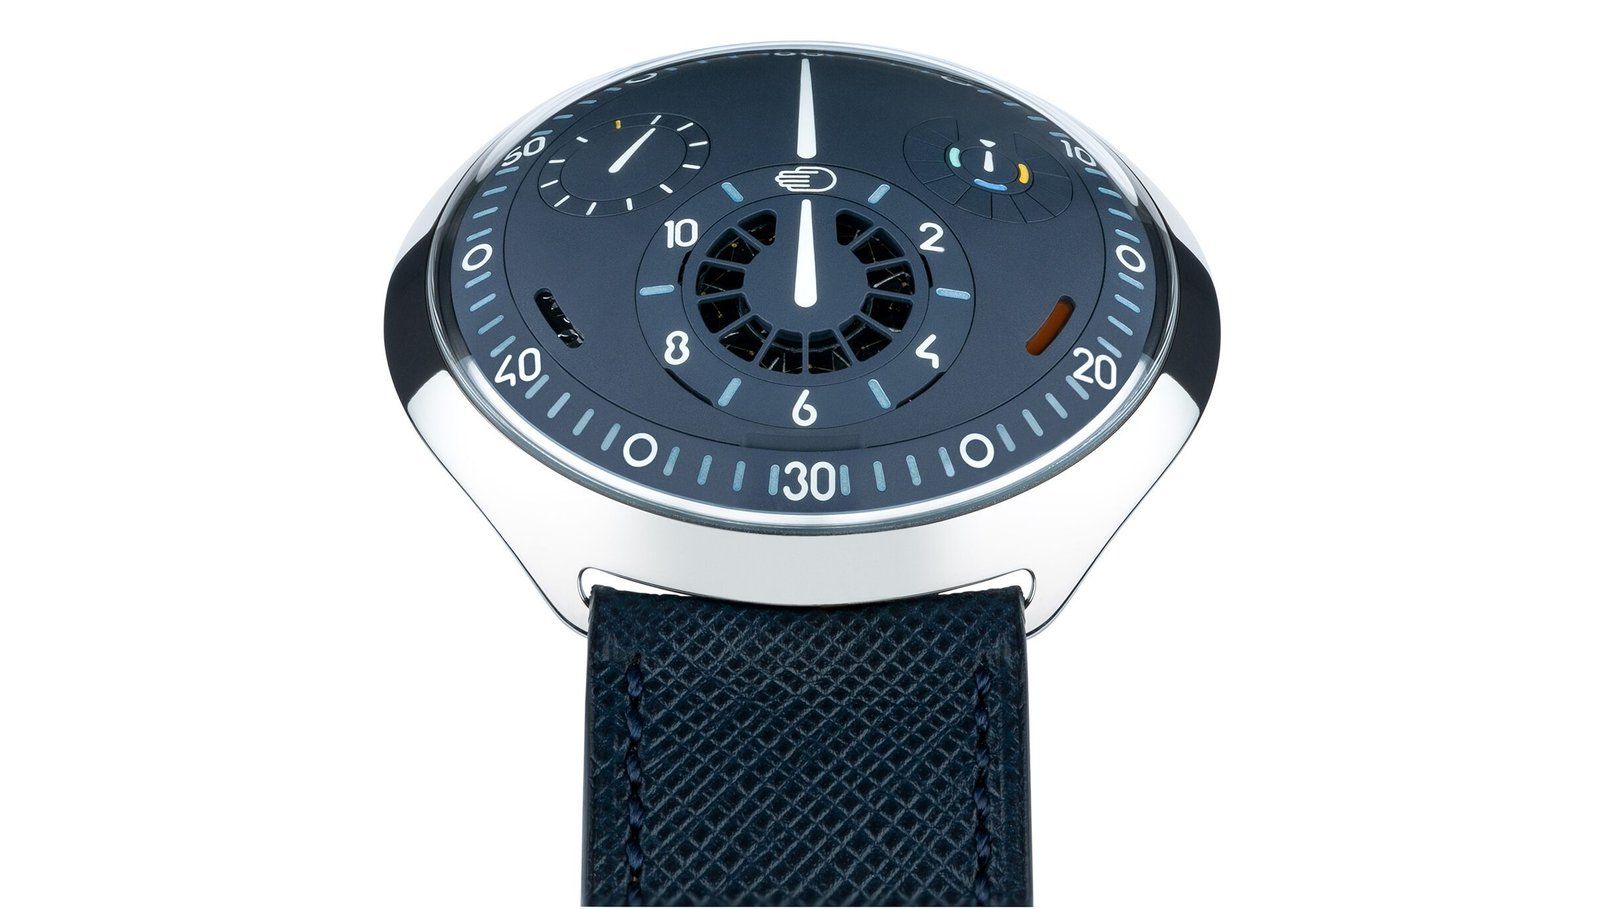 FEATURED: Ressence Type 2N